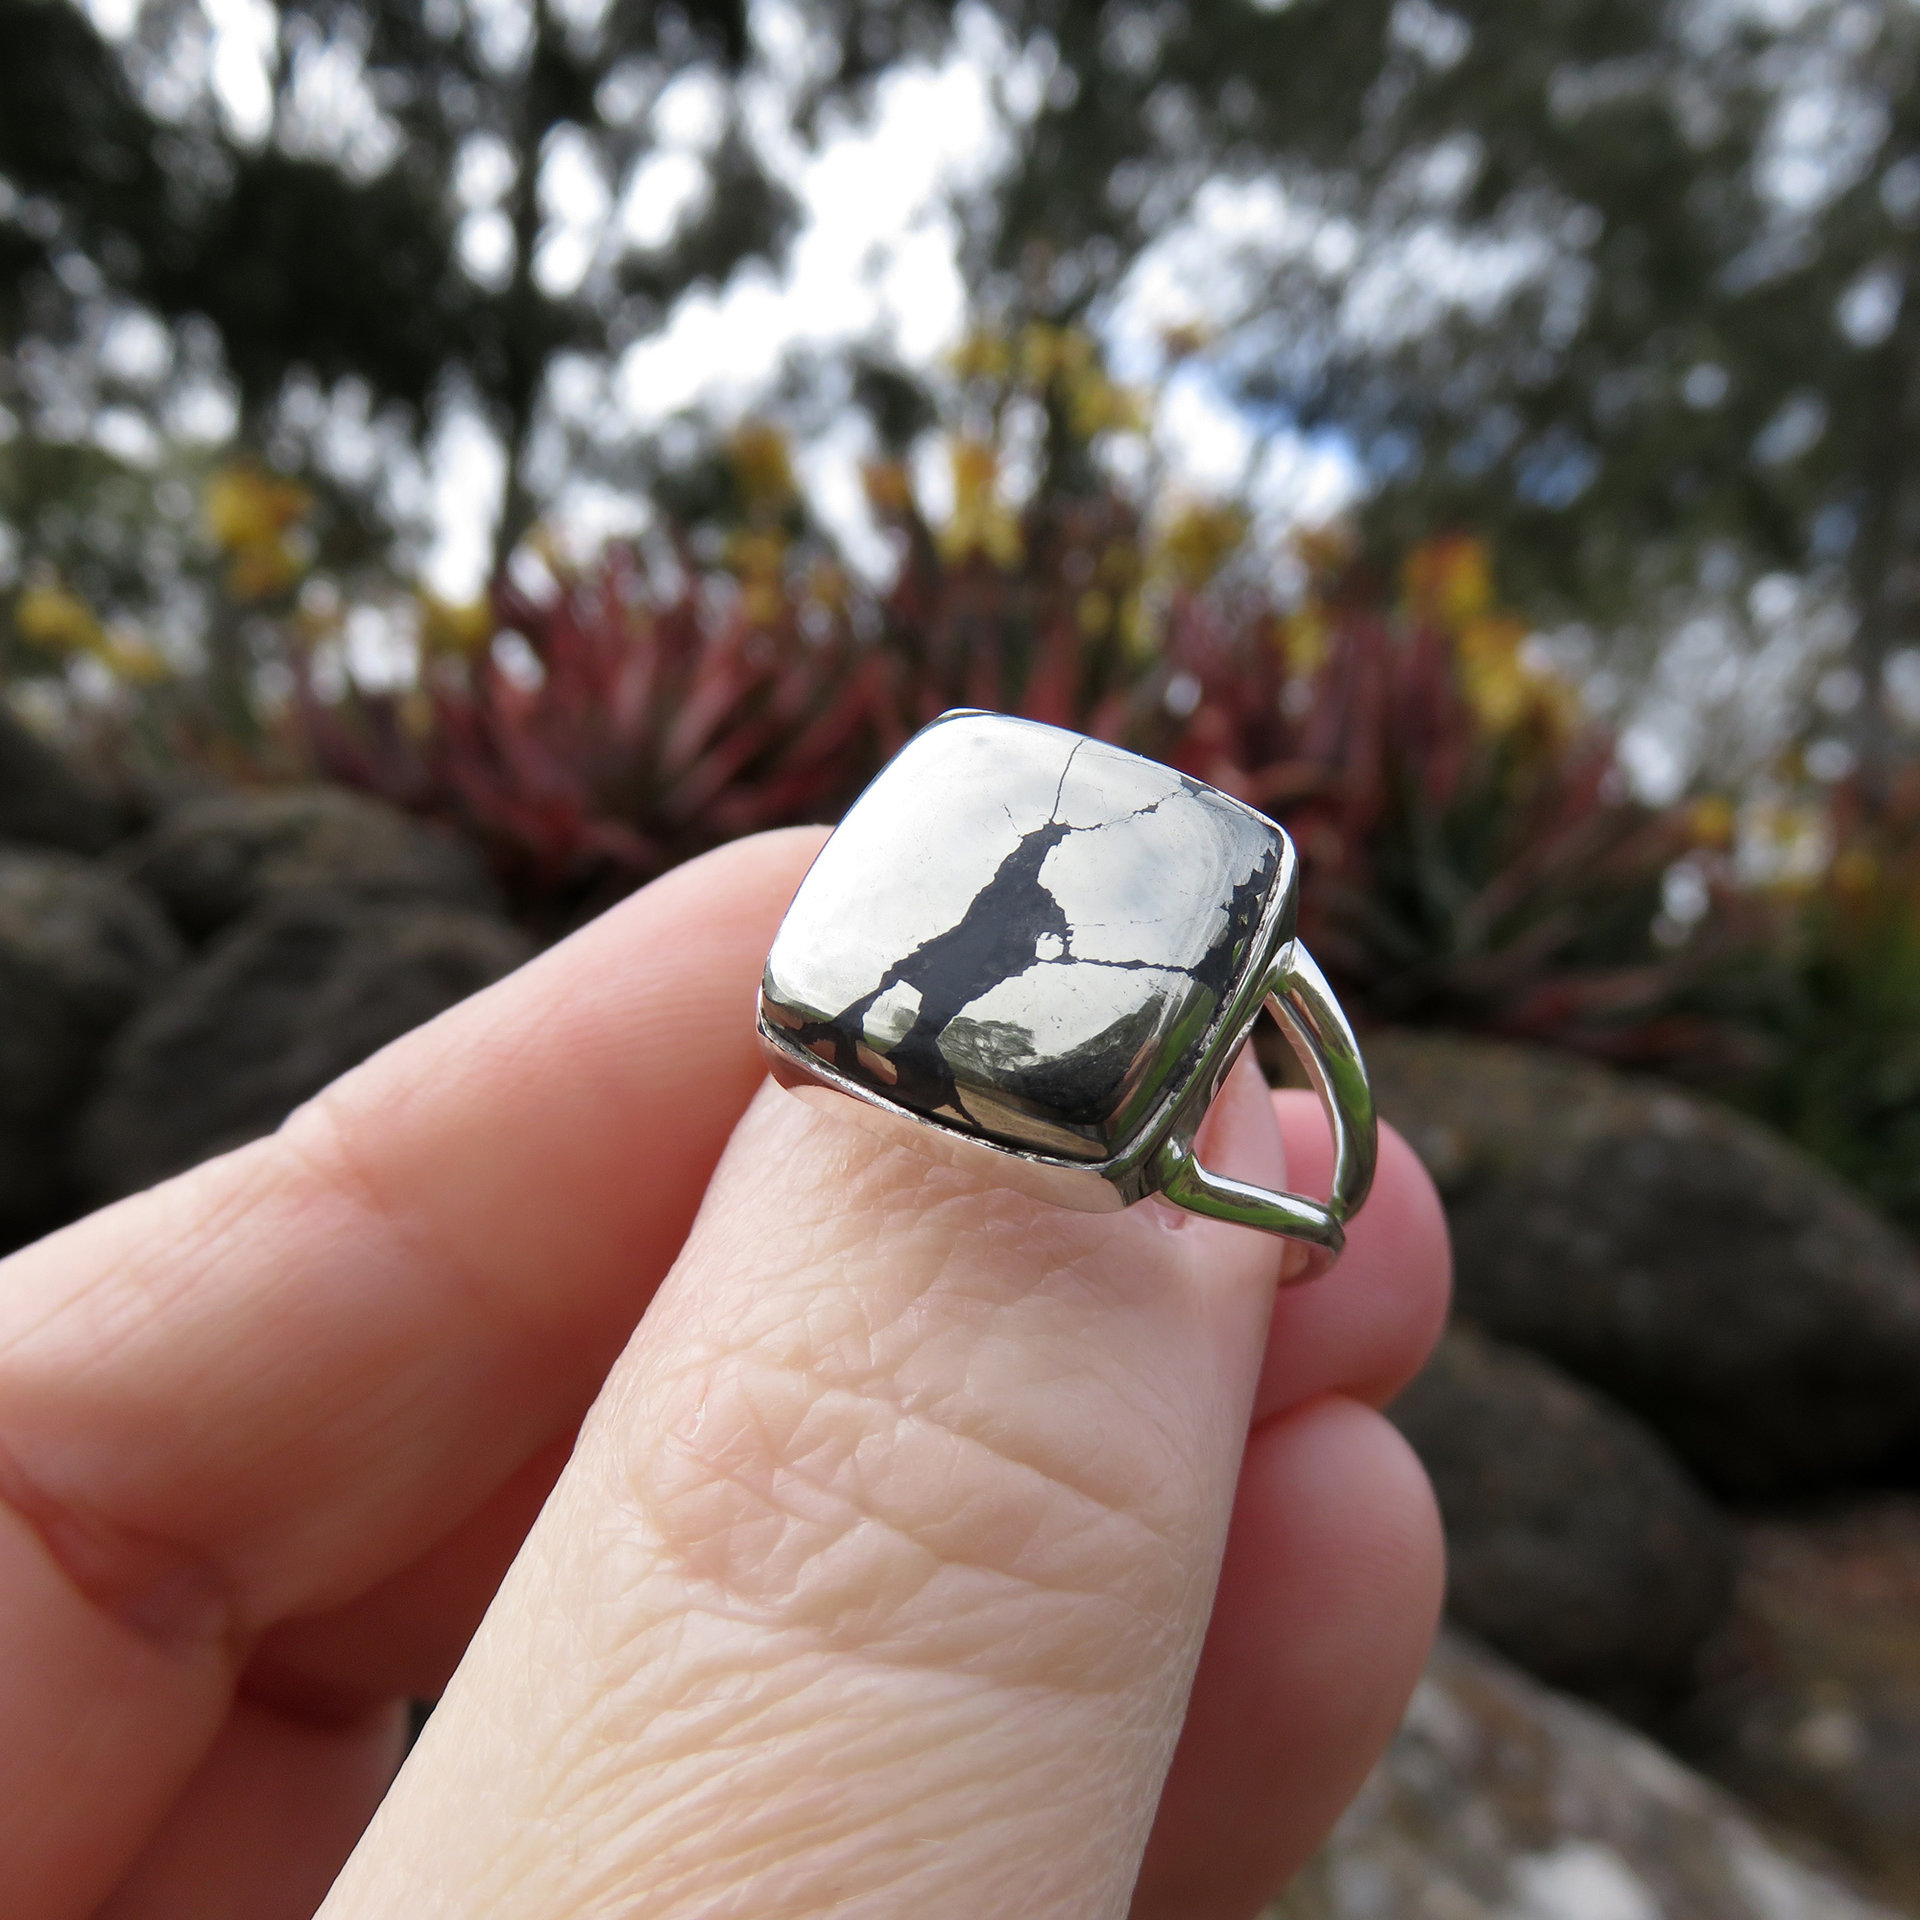 Apache Healers Gold Ring Size 9, Pyrite Square Cabochon, 925 Sterling Silver